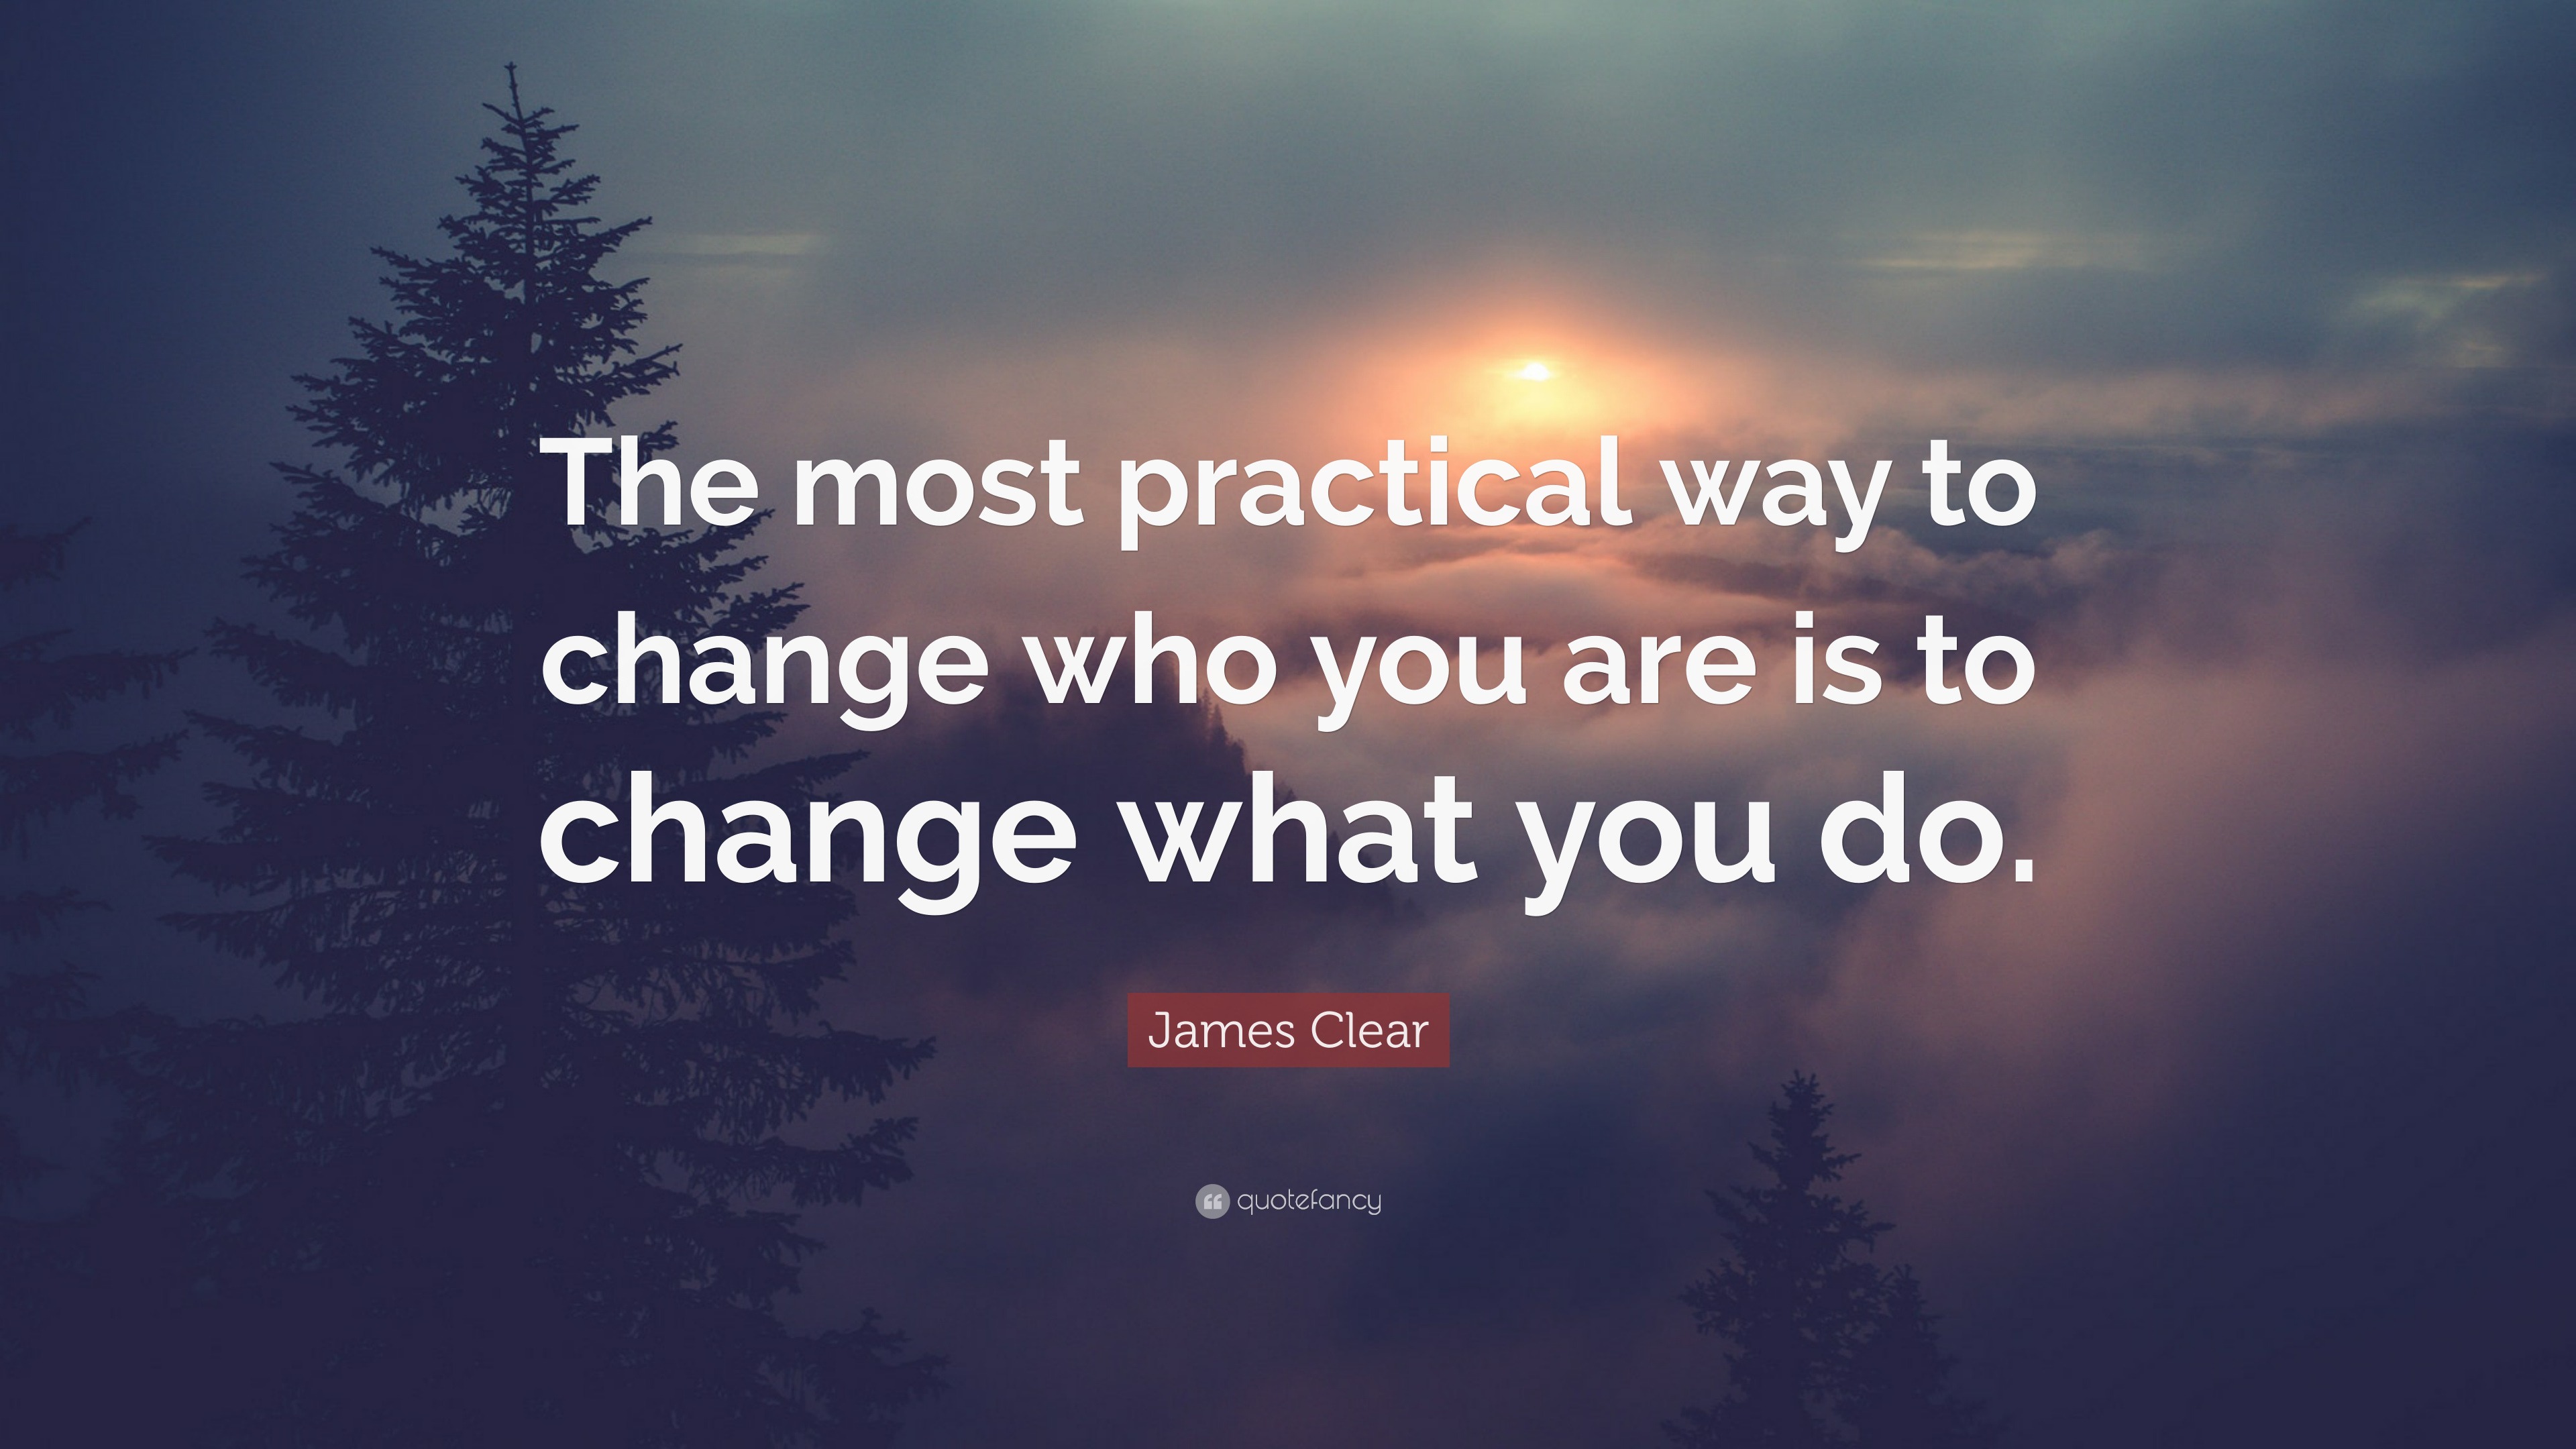 James Clear Quote: “The most practical way to change who you are is to ...